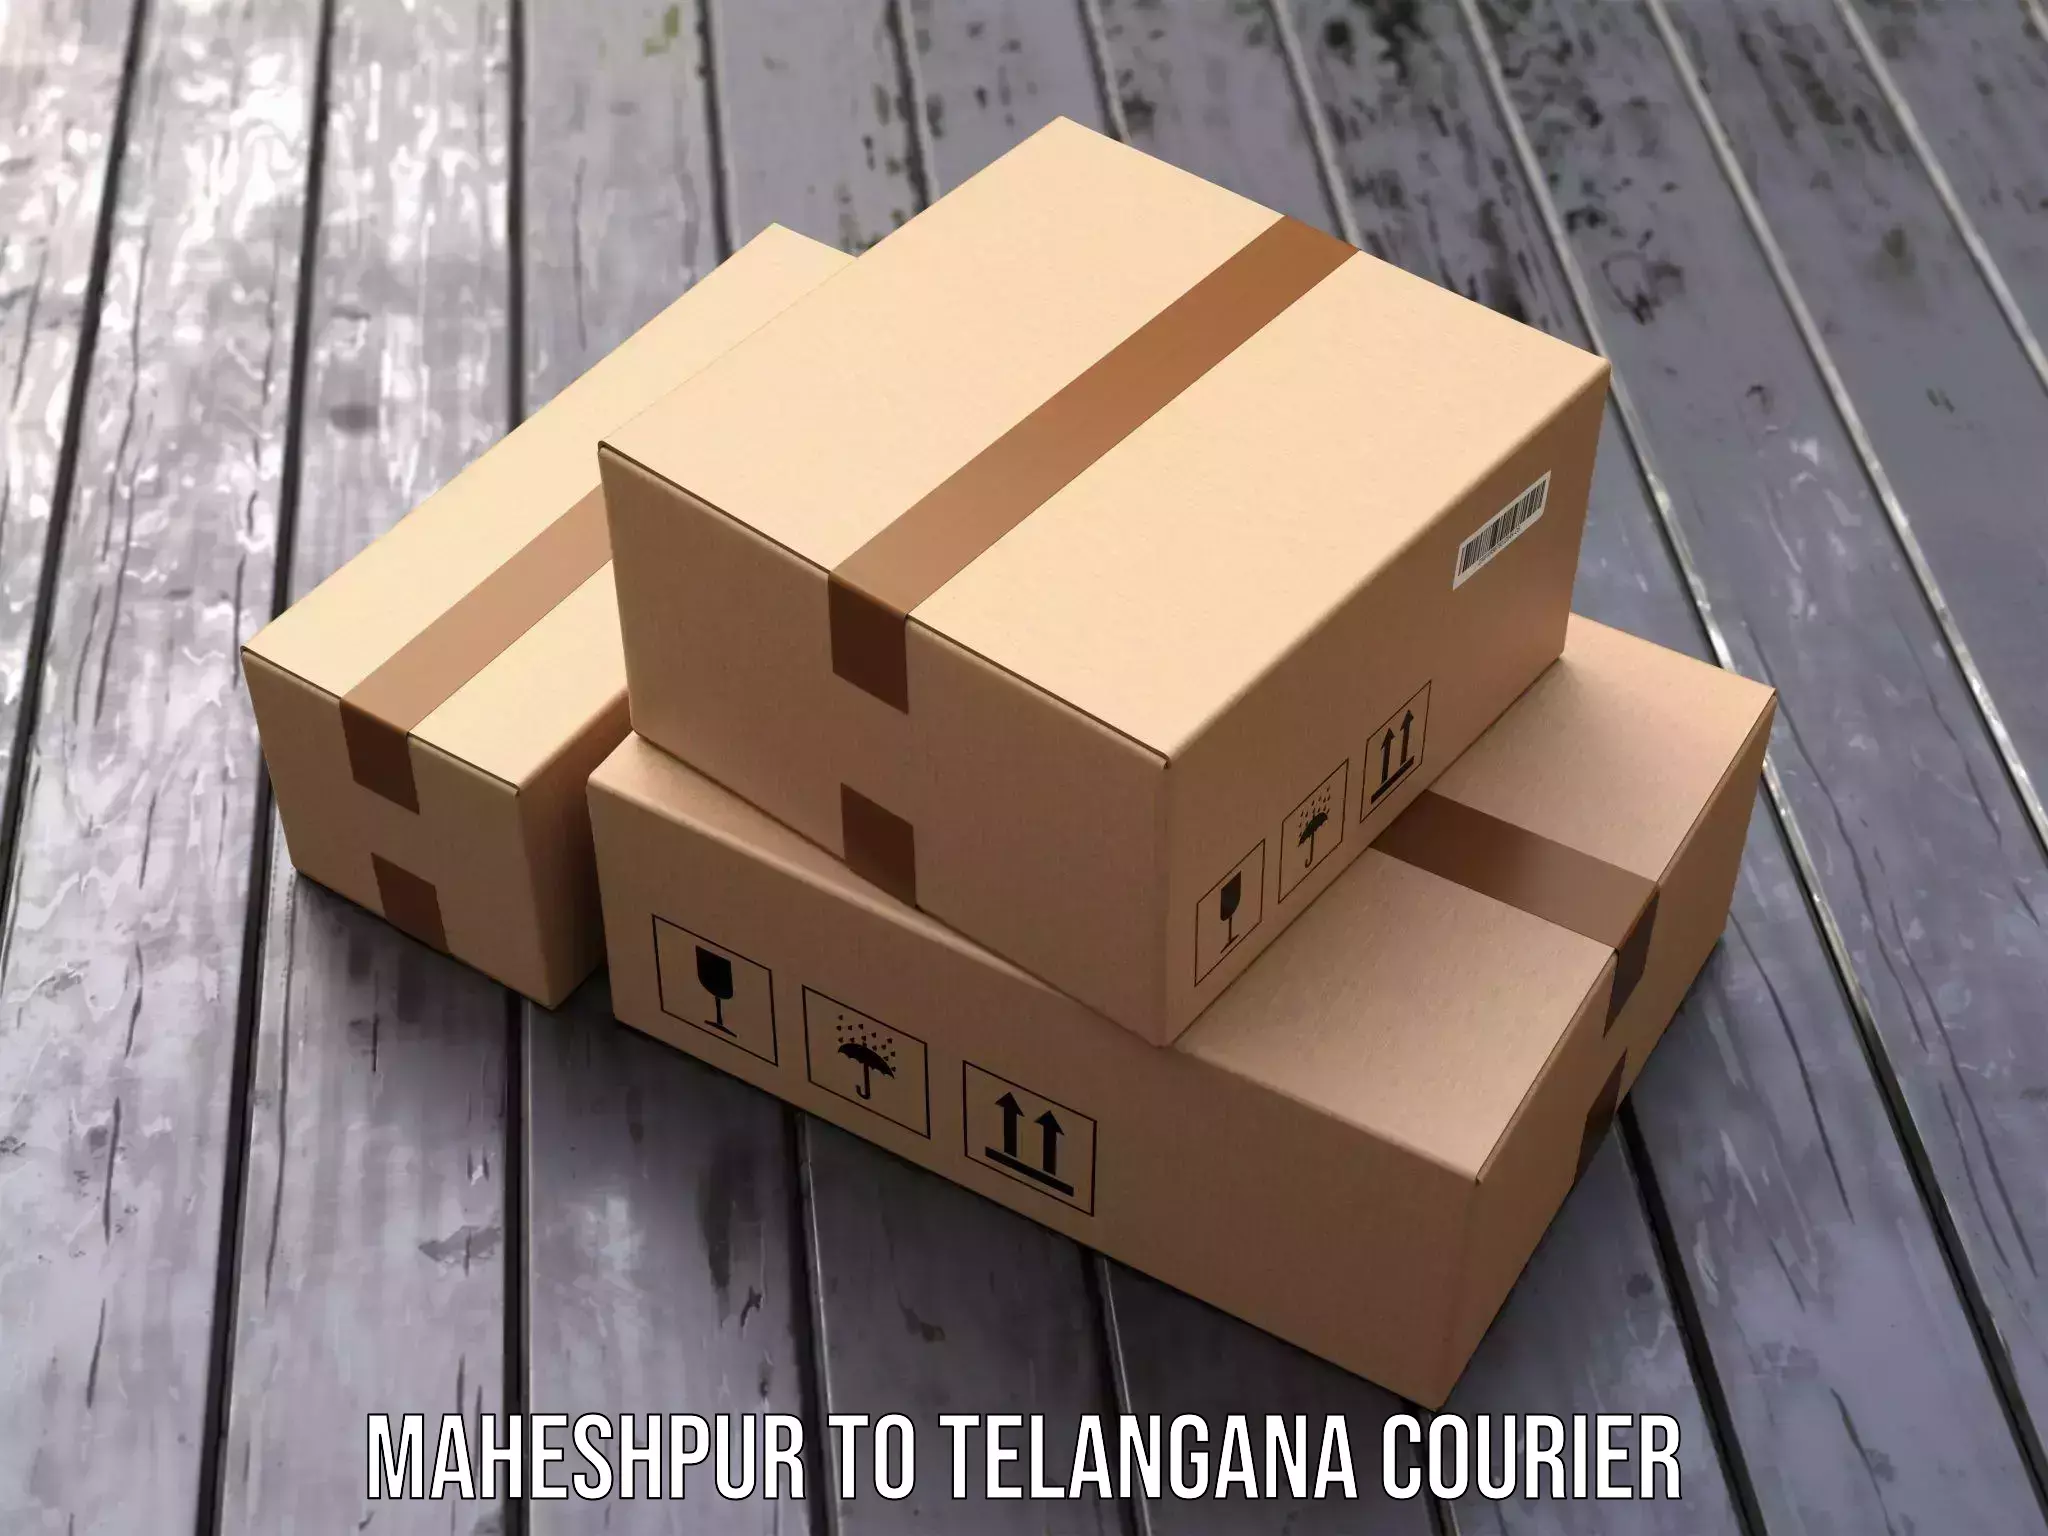 Global courier networks Maheshpur to Hyderabad